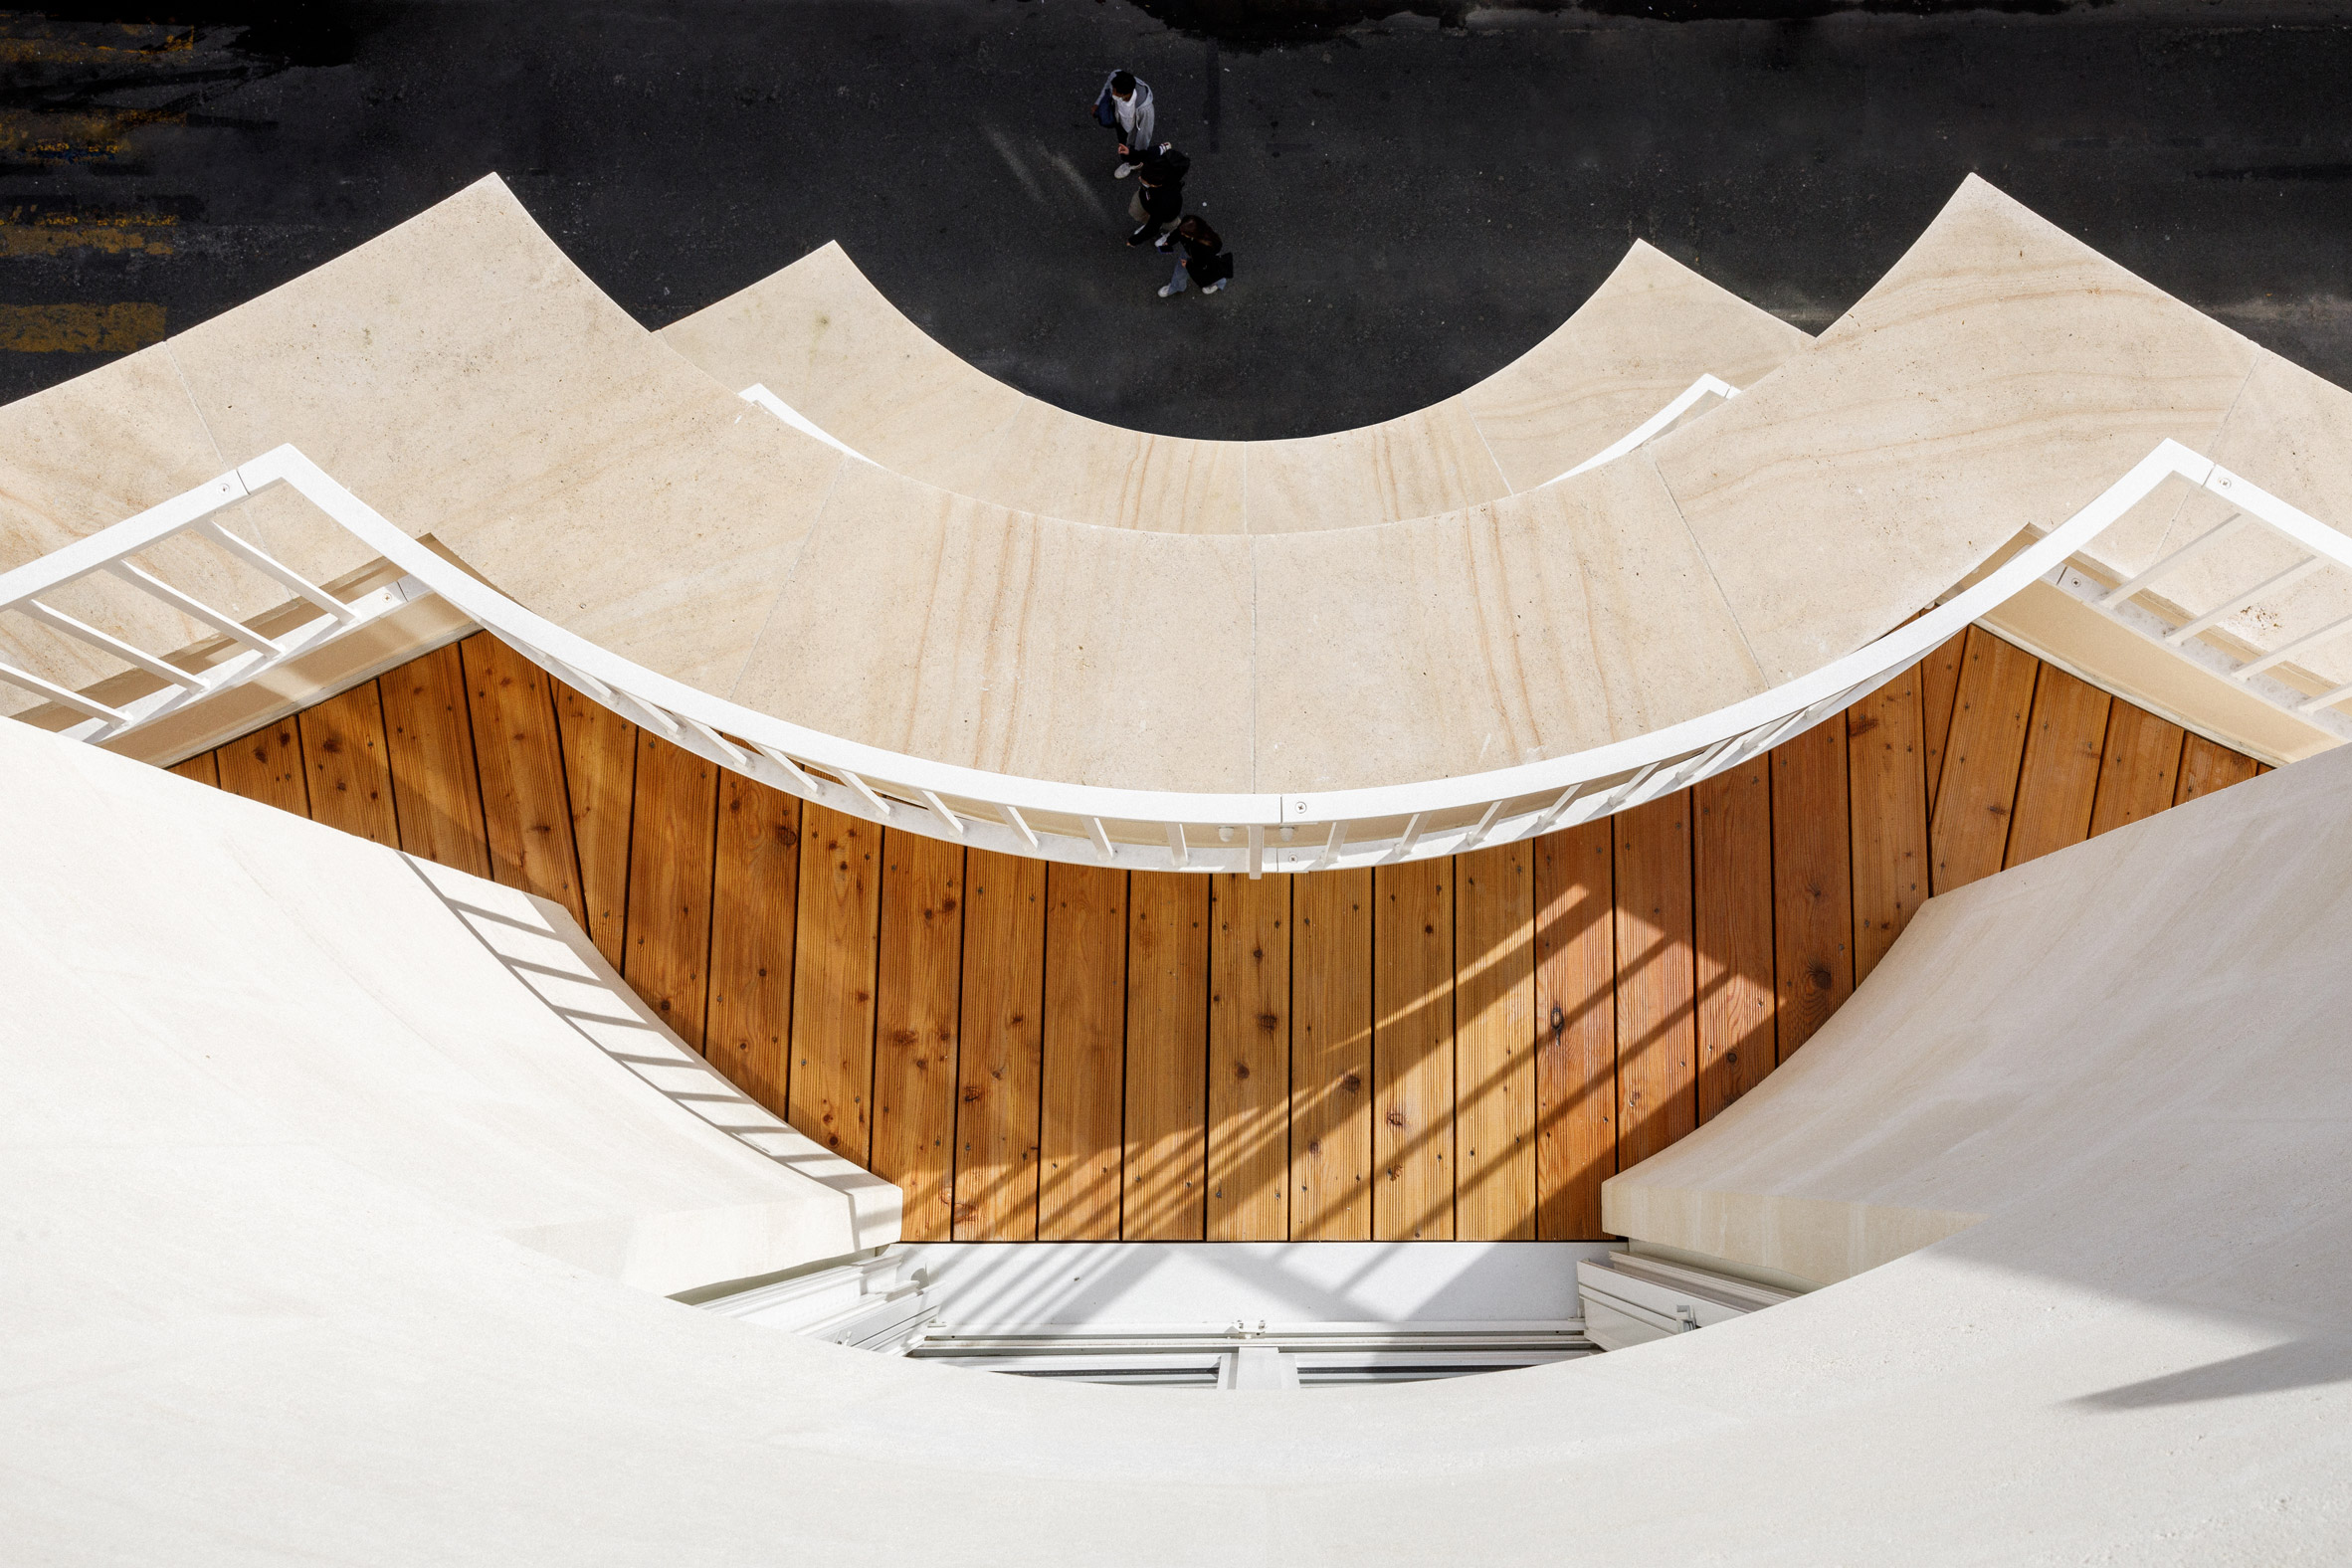 Wood-decked curved terraces built into a curved limestone facade